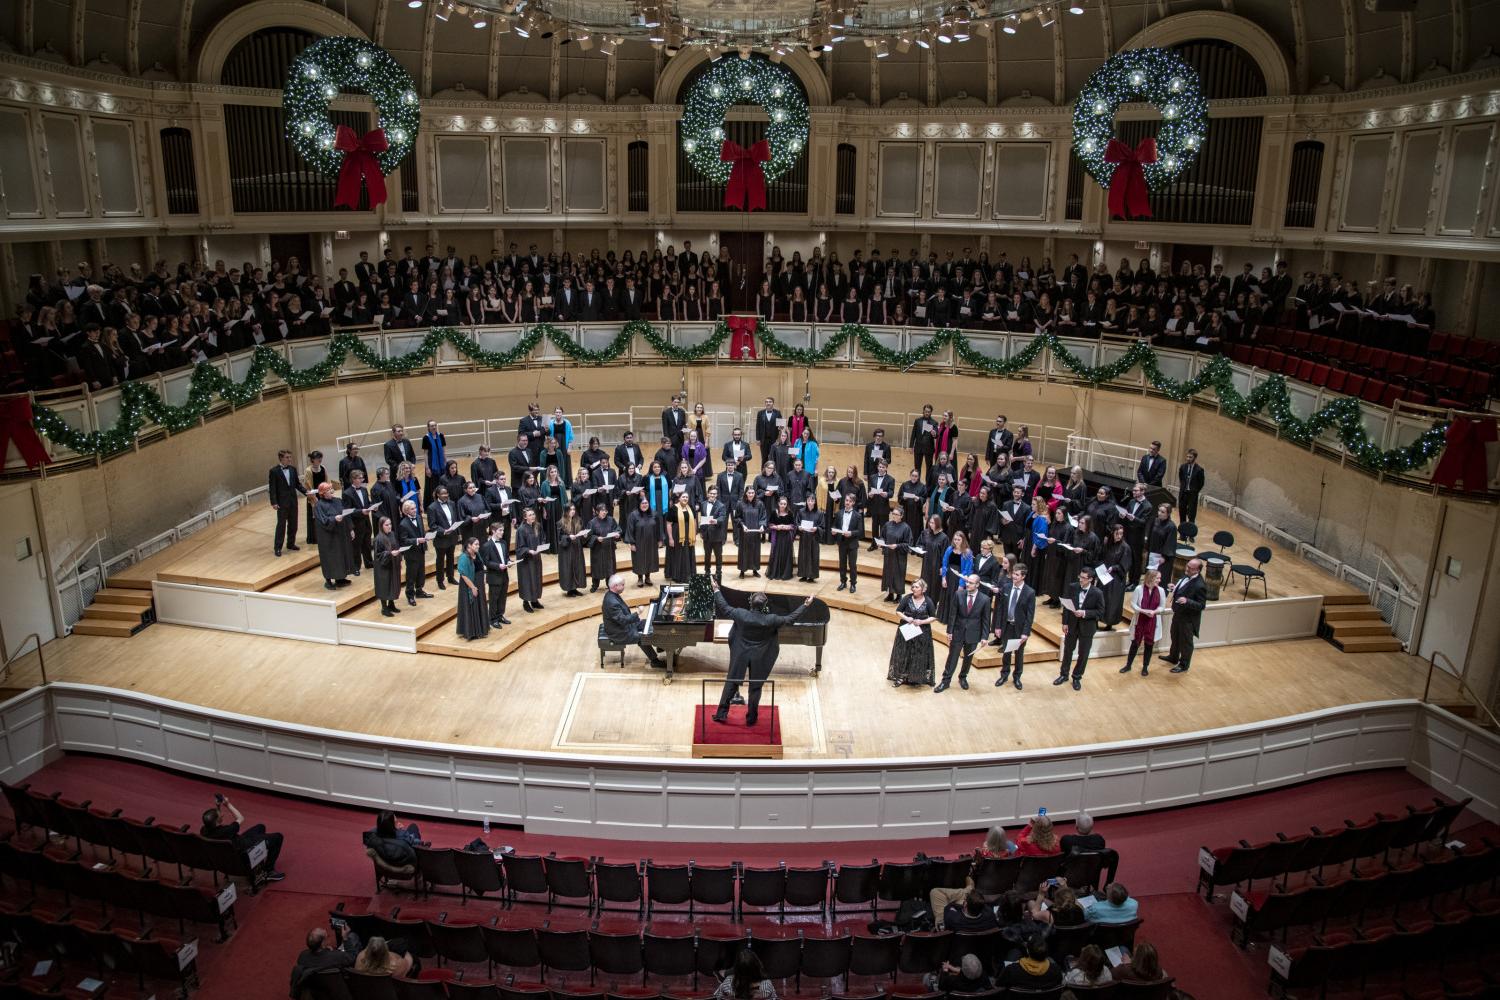 The <a href='http://vn7i.yihetianquan.com'>bv伟德ios下载</a> Choir performs in the Chicago Symphony Hall.